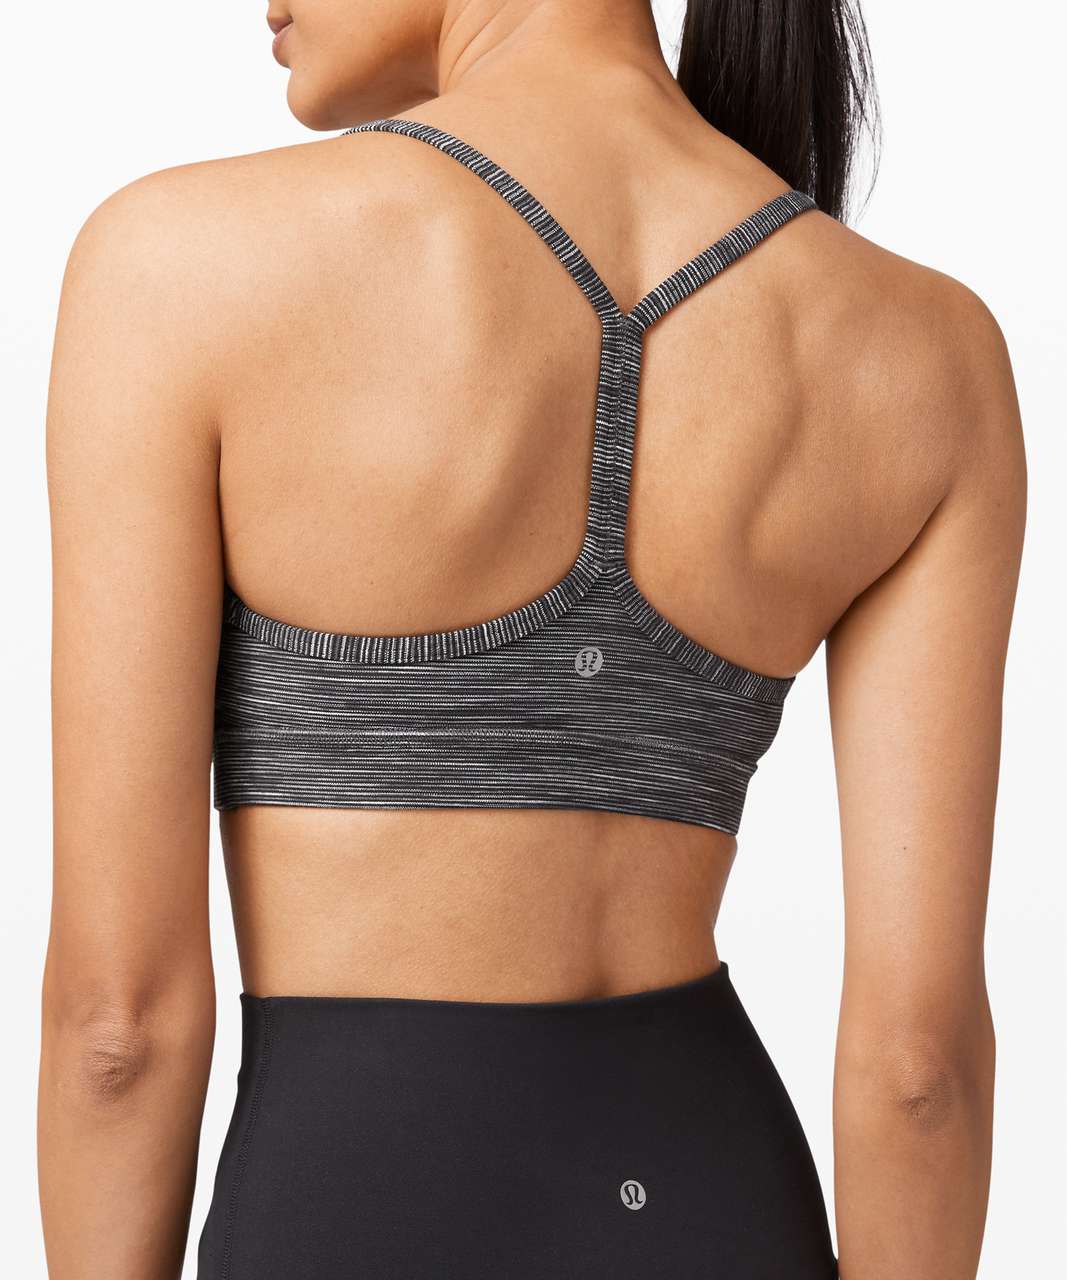 Lululemon Flow Y Bra Nulu *Light Support, B/C Cup - Wee Are From Space Dark Carbon Ice Grey